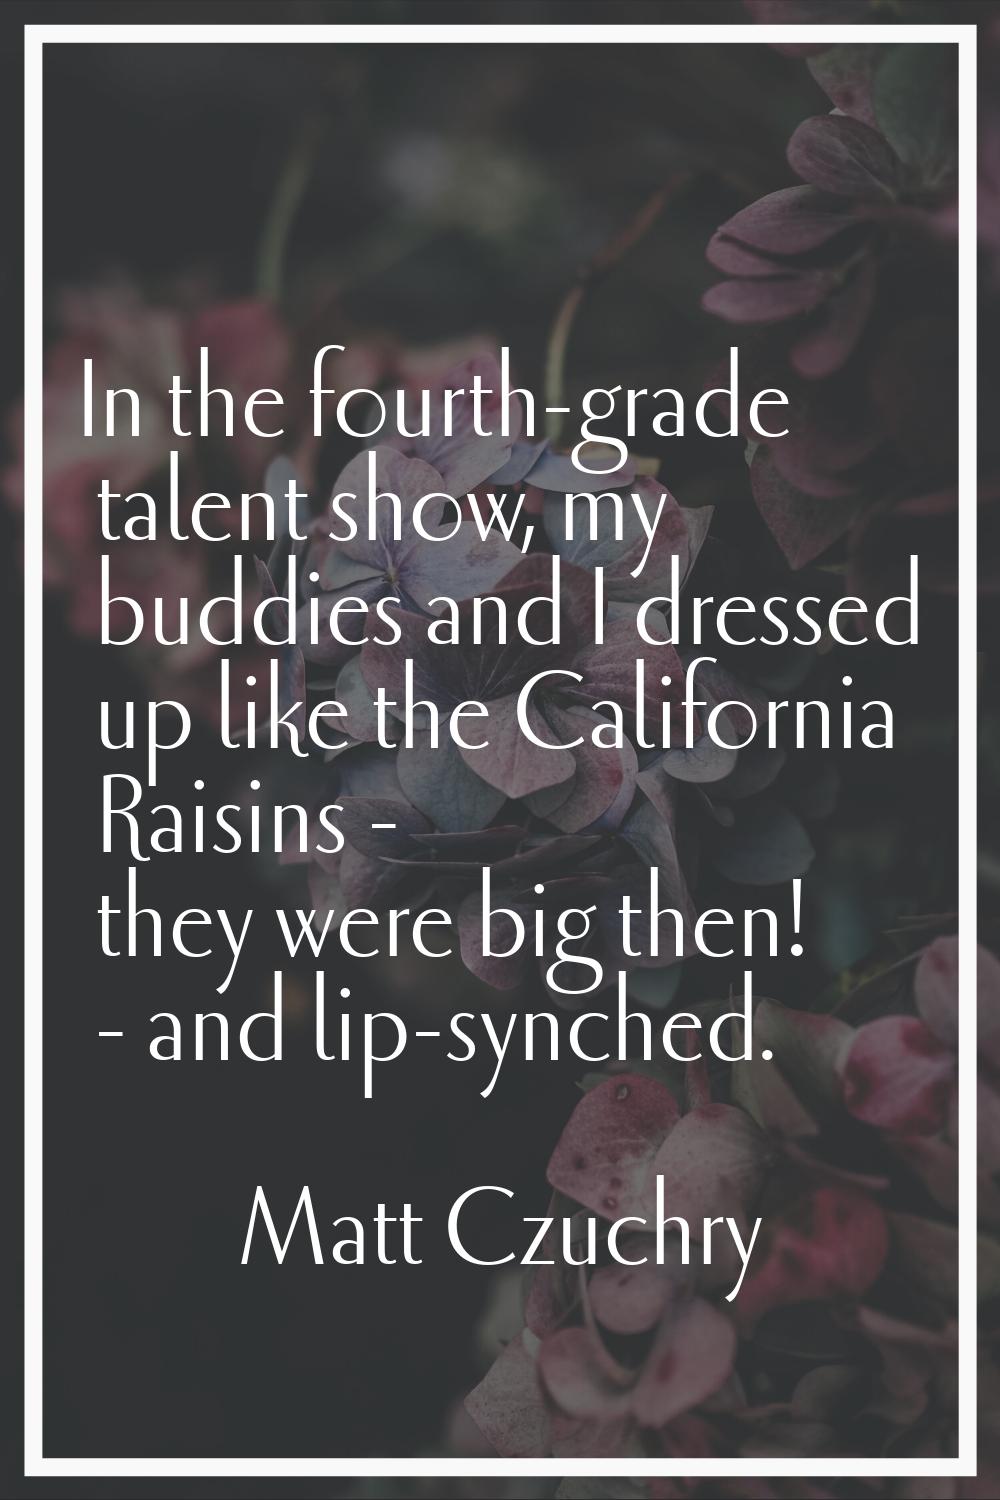 In the fourth-grade talent show, my buddies and I dressed up like the California Raisins - they wer